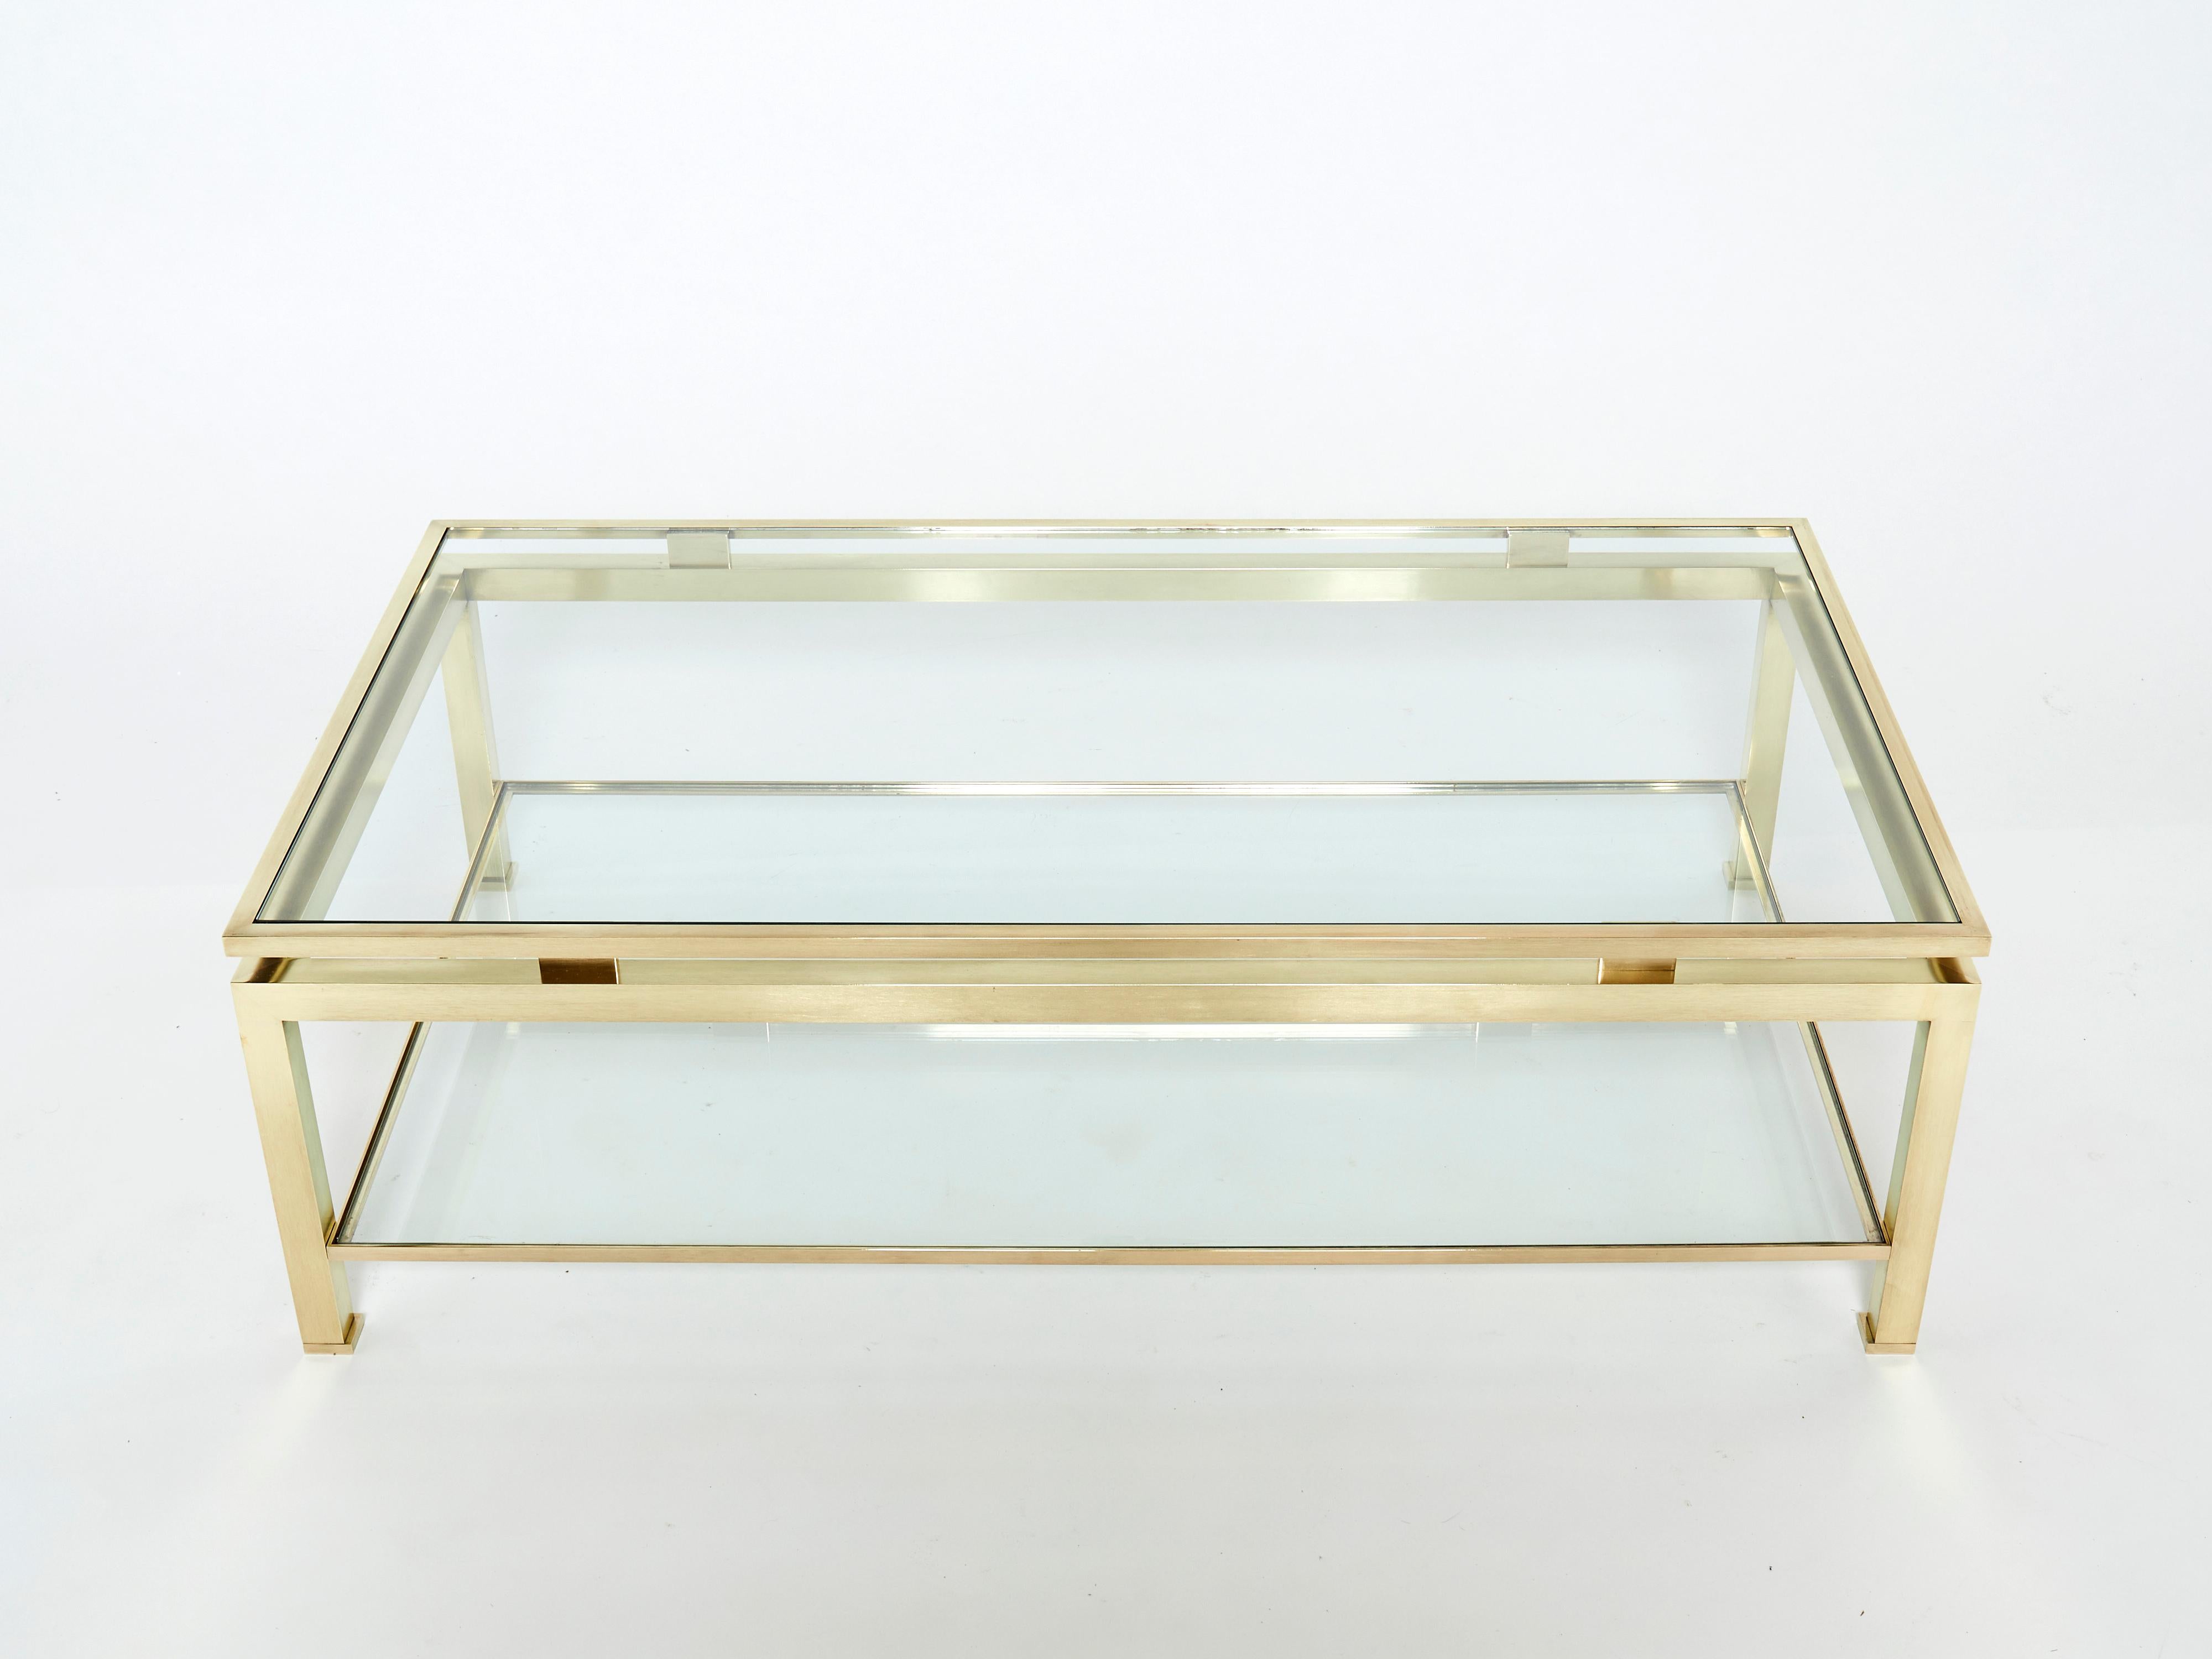 Simple lines point to this two-tier coffee table's french mid-century roots. Designed by Guy Lefevre for Maison Jansen, it features silky brass legs and transparent glass tops. Its symmetry, elevated glass, asian inspiration and strong architectural